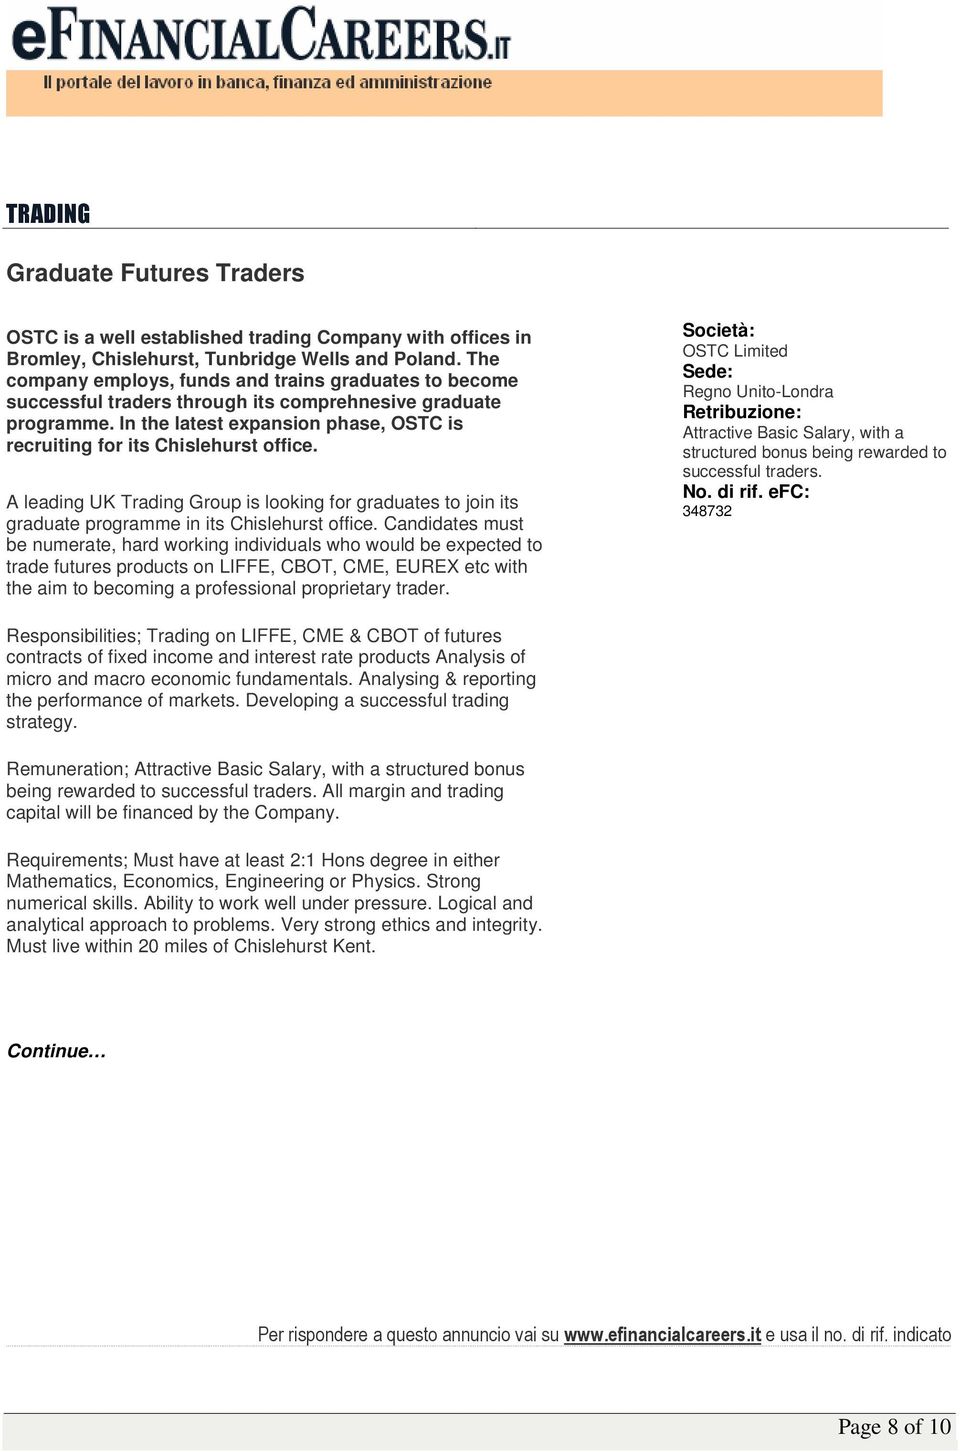 A leading UK Trading Group is looking for graduates to join its graduate programme in its Chislehurst office.